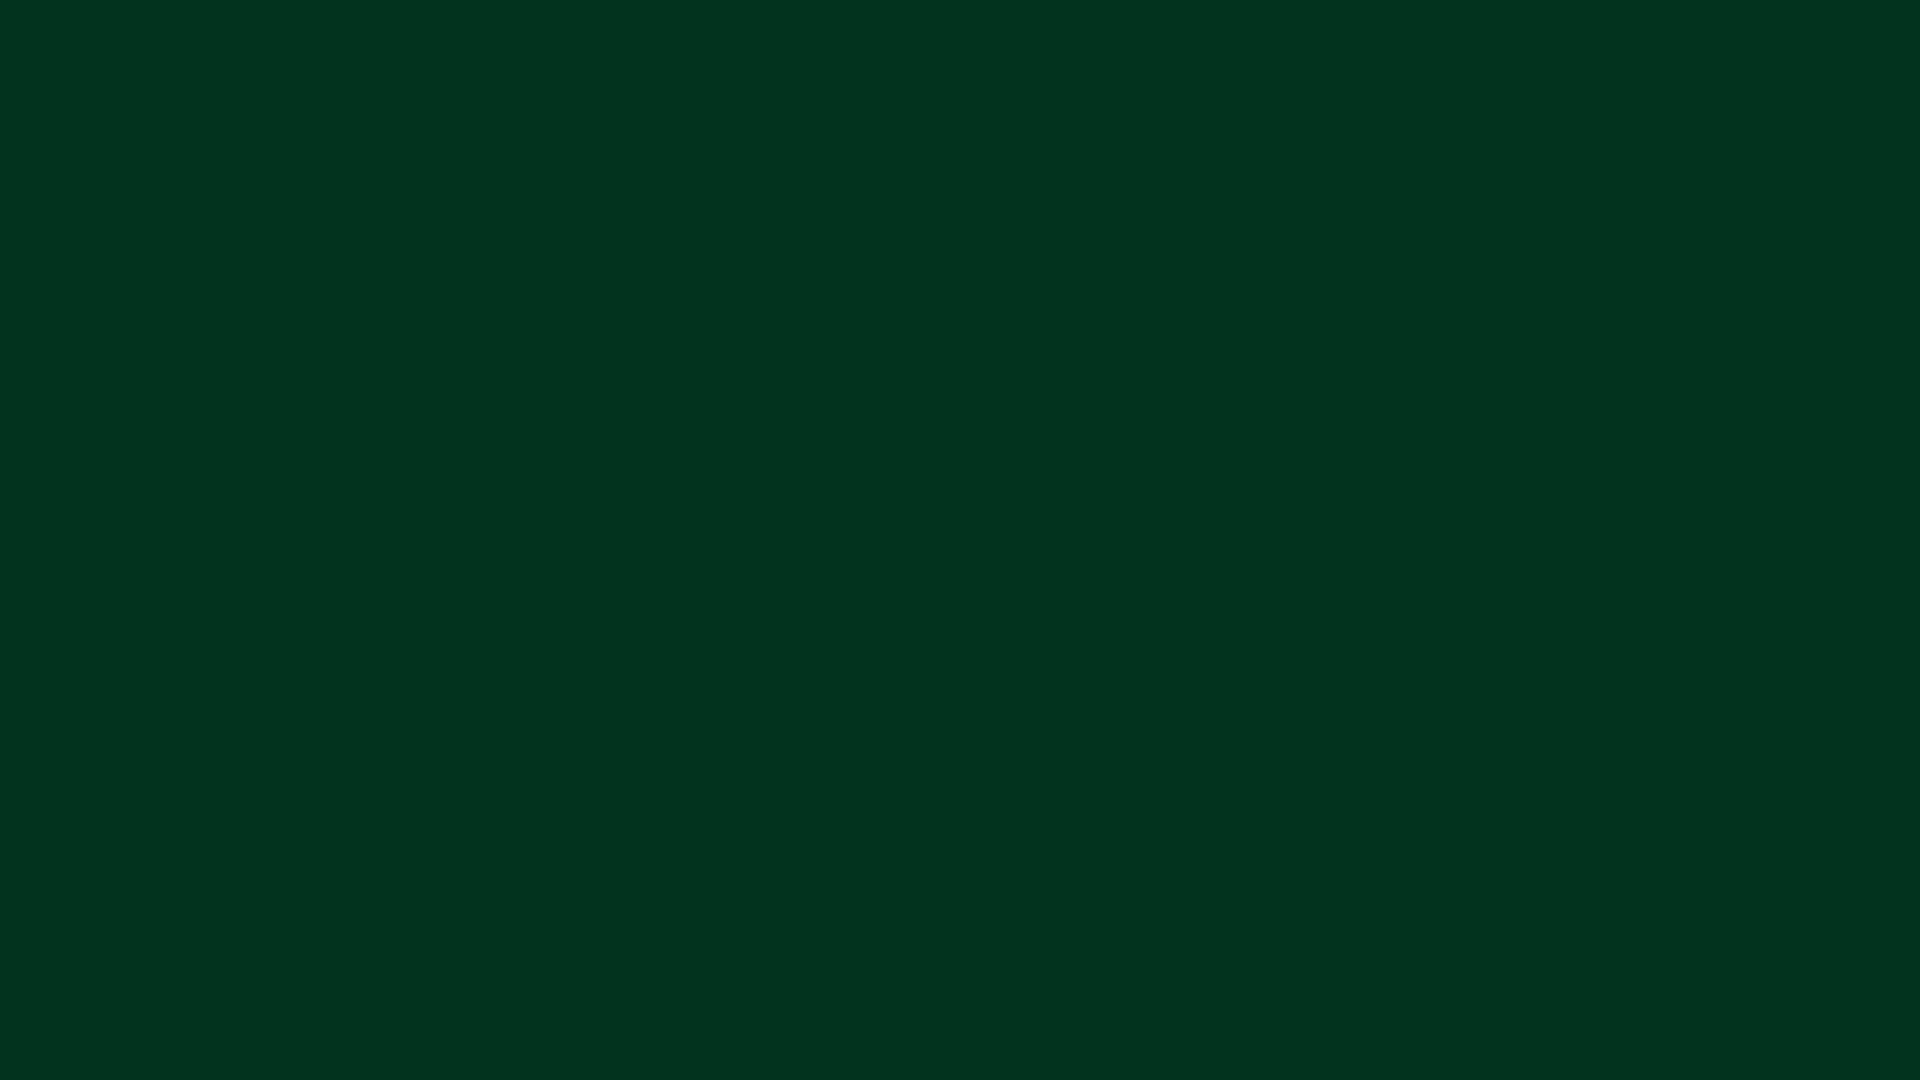 A Dark and Vibrant Green Background